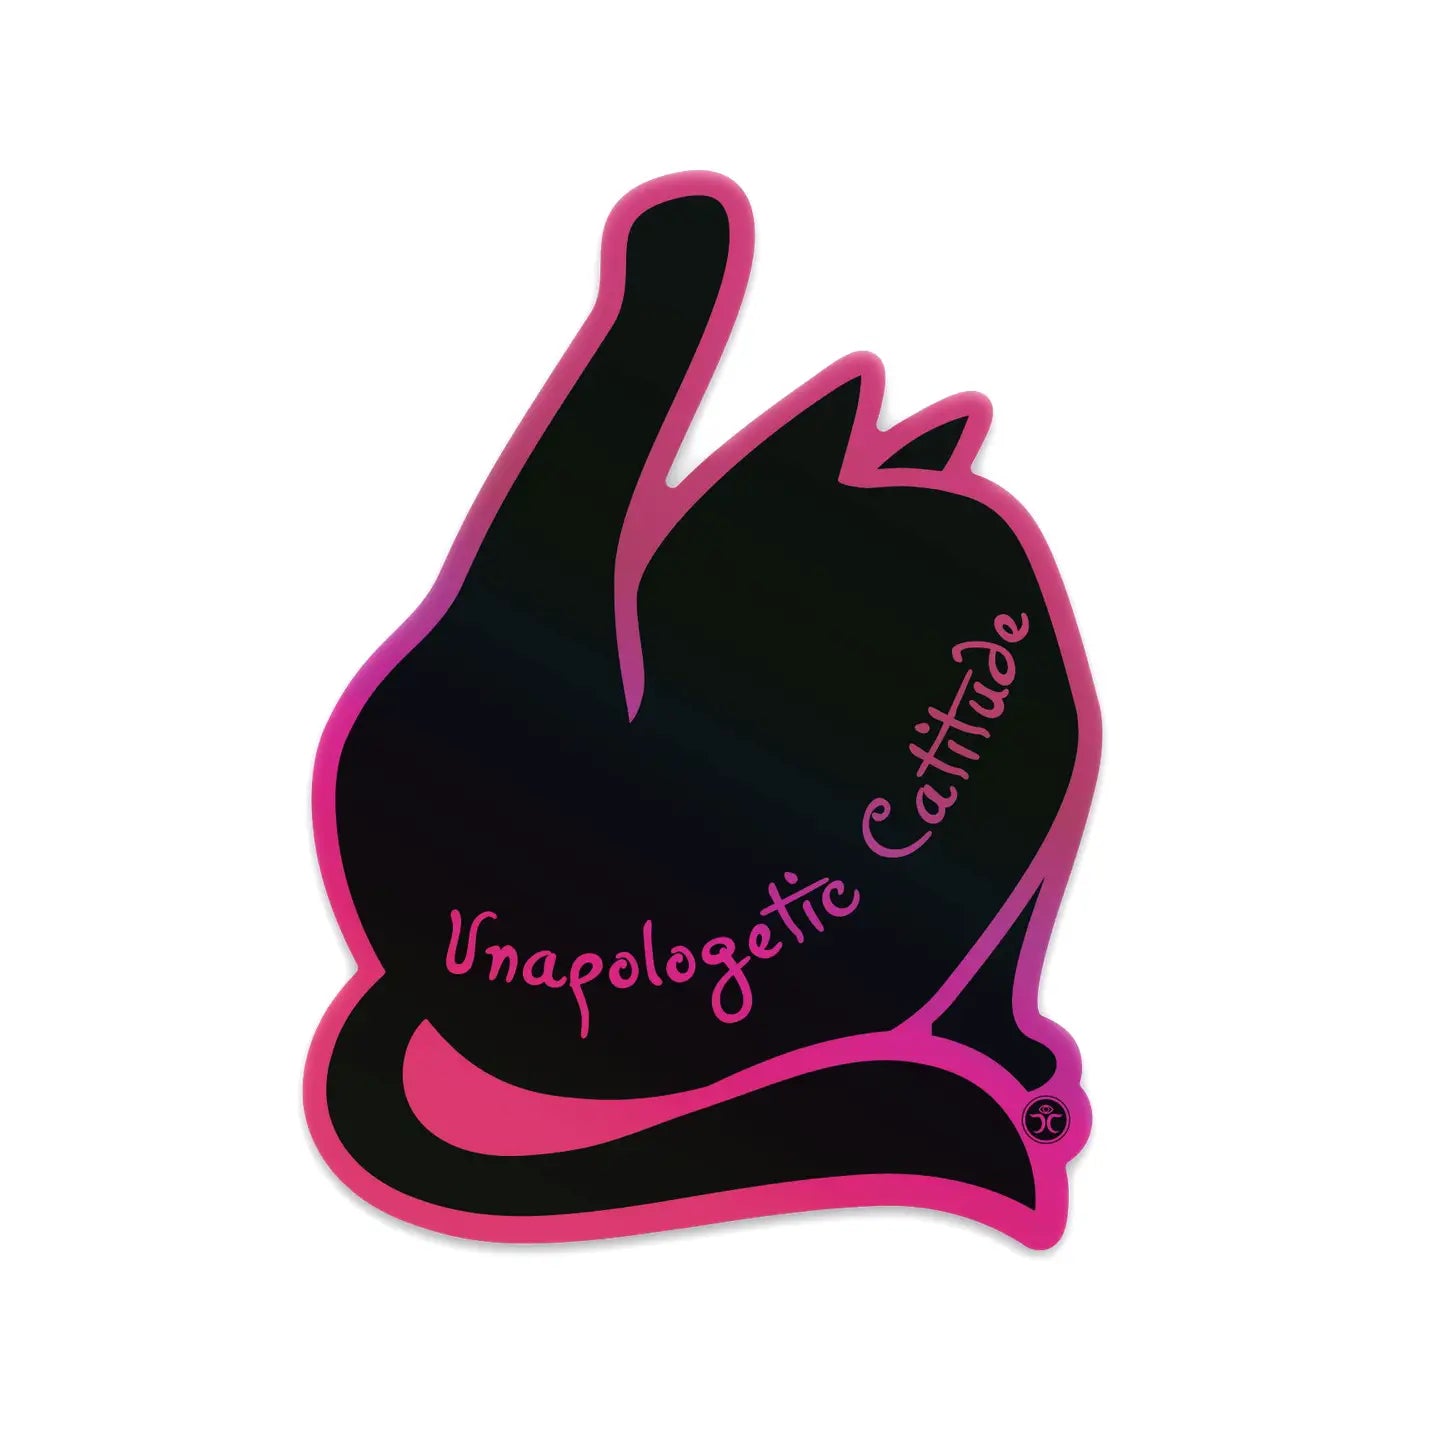 Unapologetic Catitude Black Cat/ Special Hot Pink Edition - Holographic Sticker